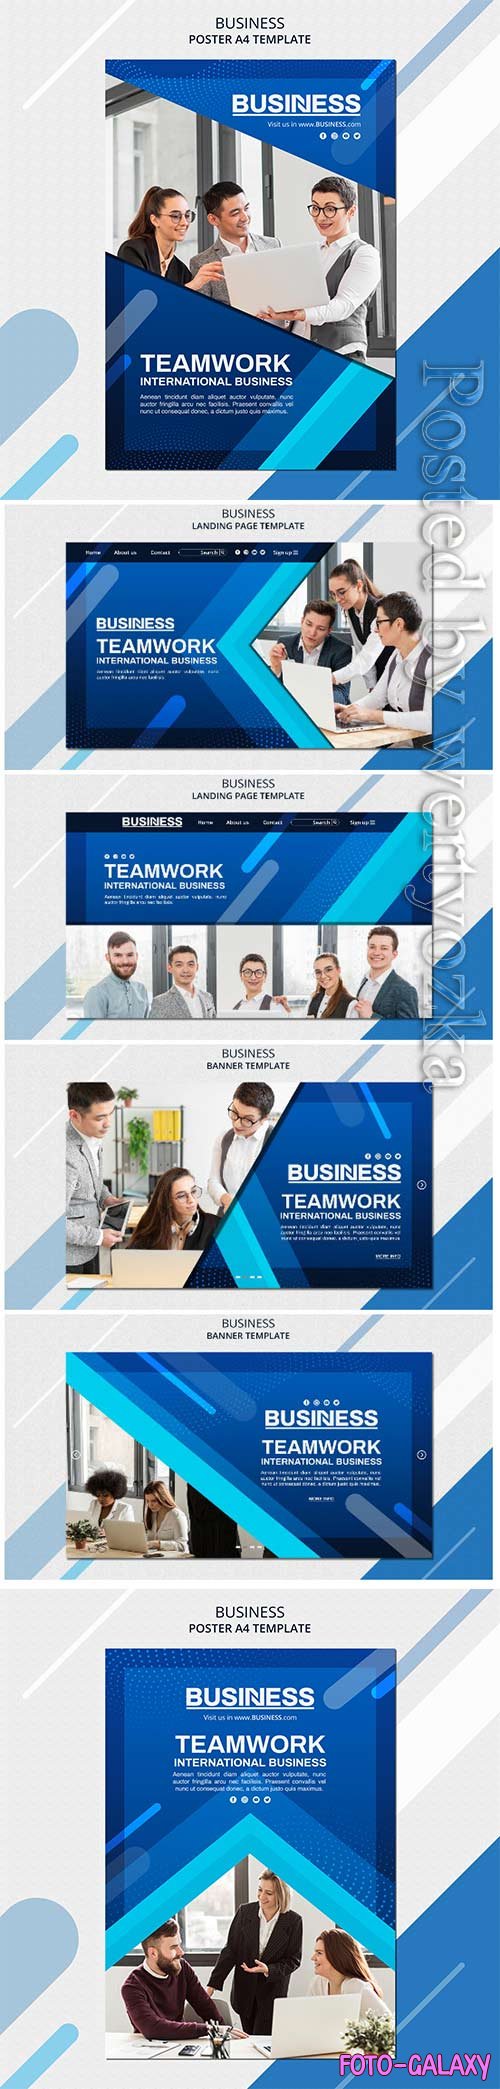 Business concept landing page template